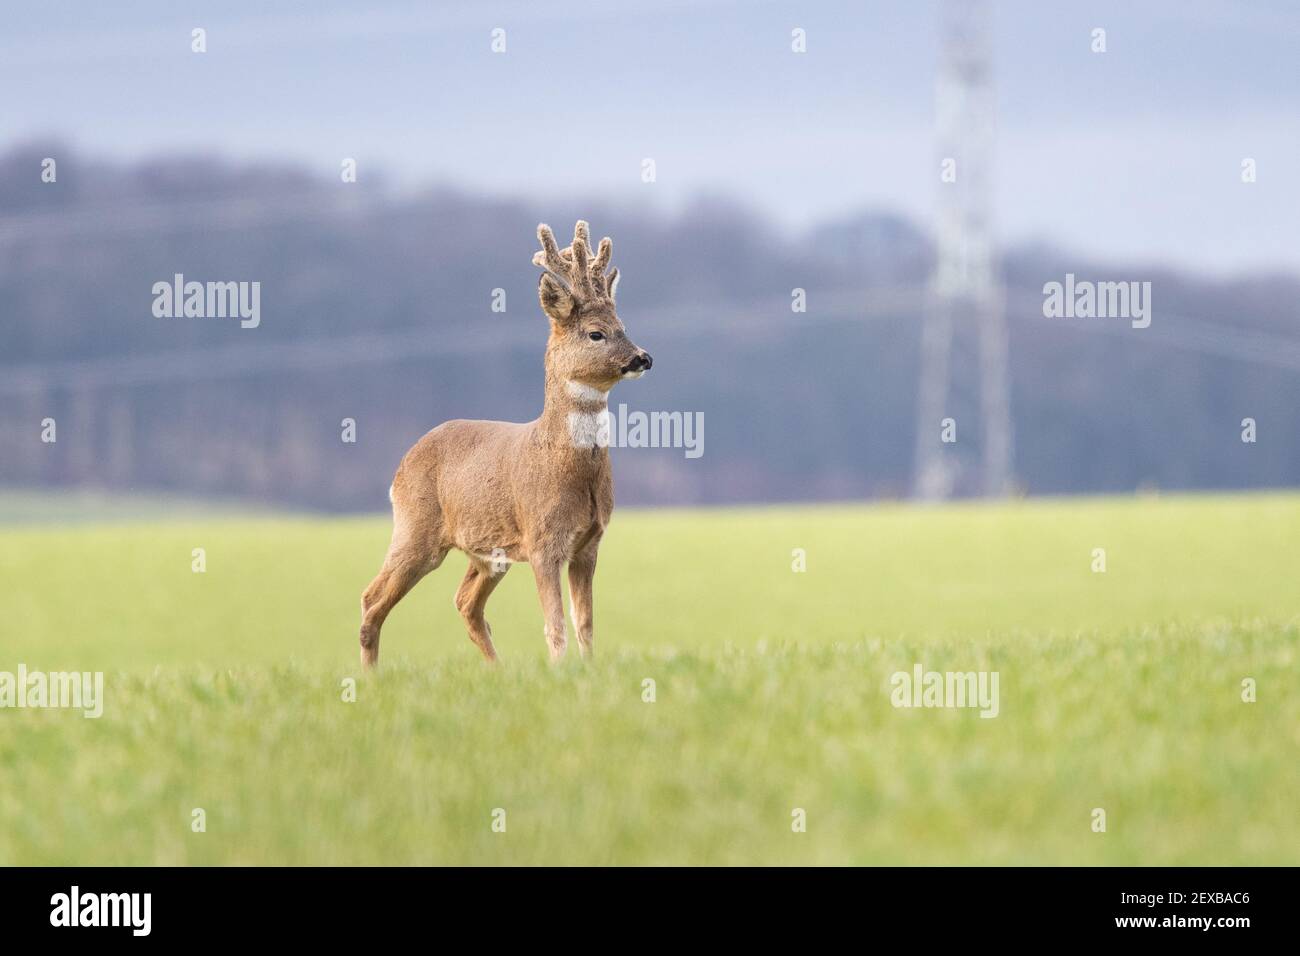 Roe Deer buck (capreolus capreolus) standing in field in March with velvet covered antlers and white gorget patch on neck - Scotland, UK Stock Photo